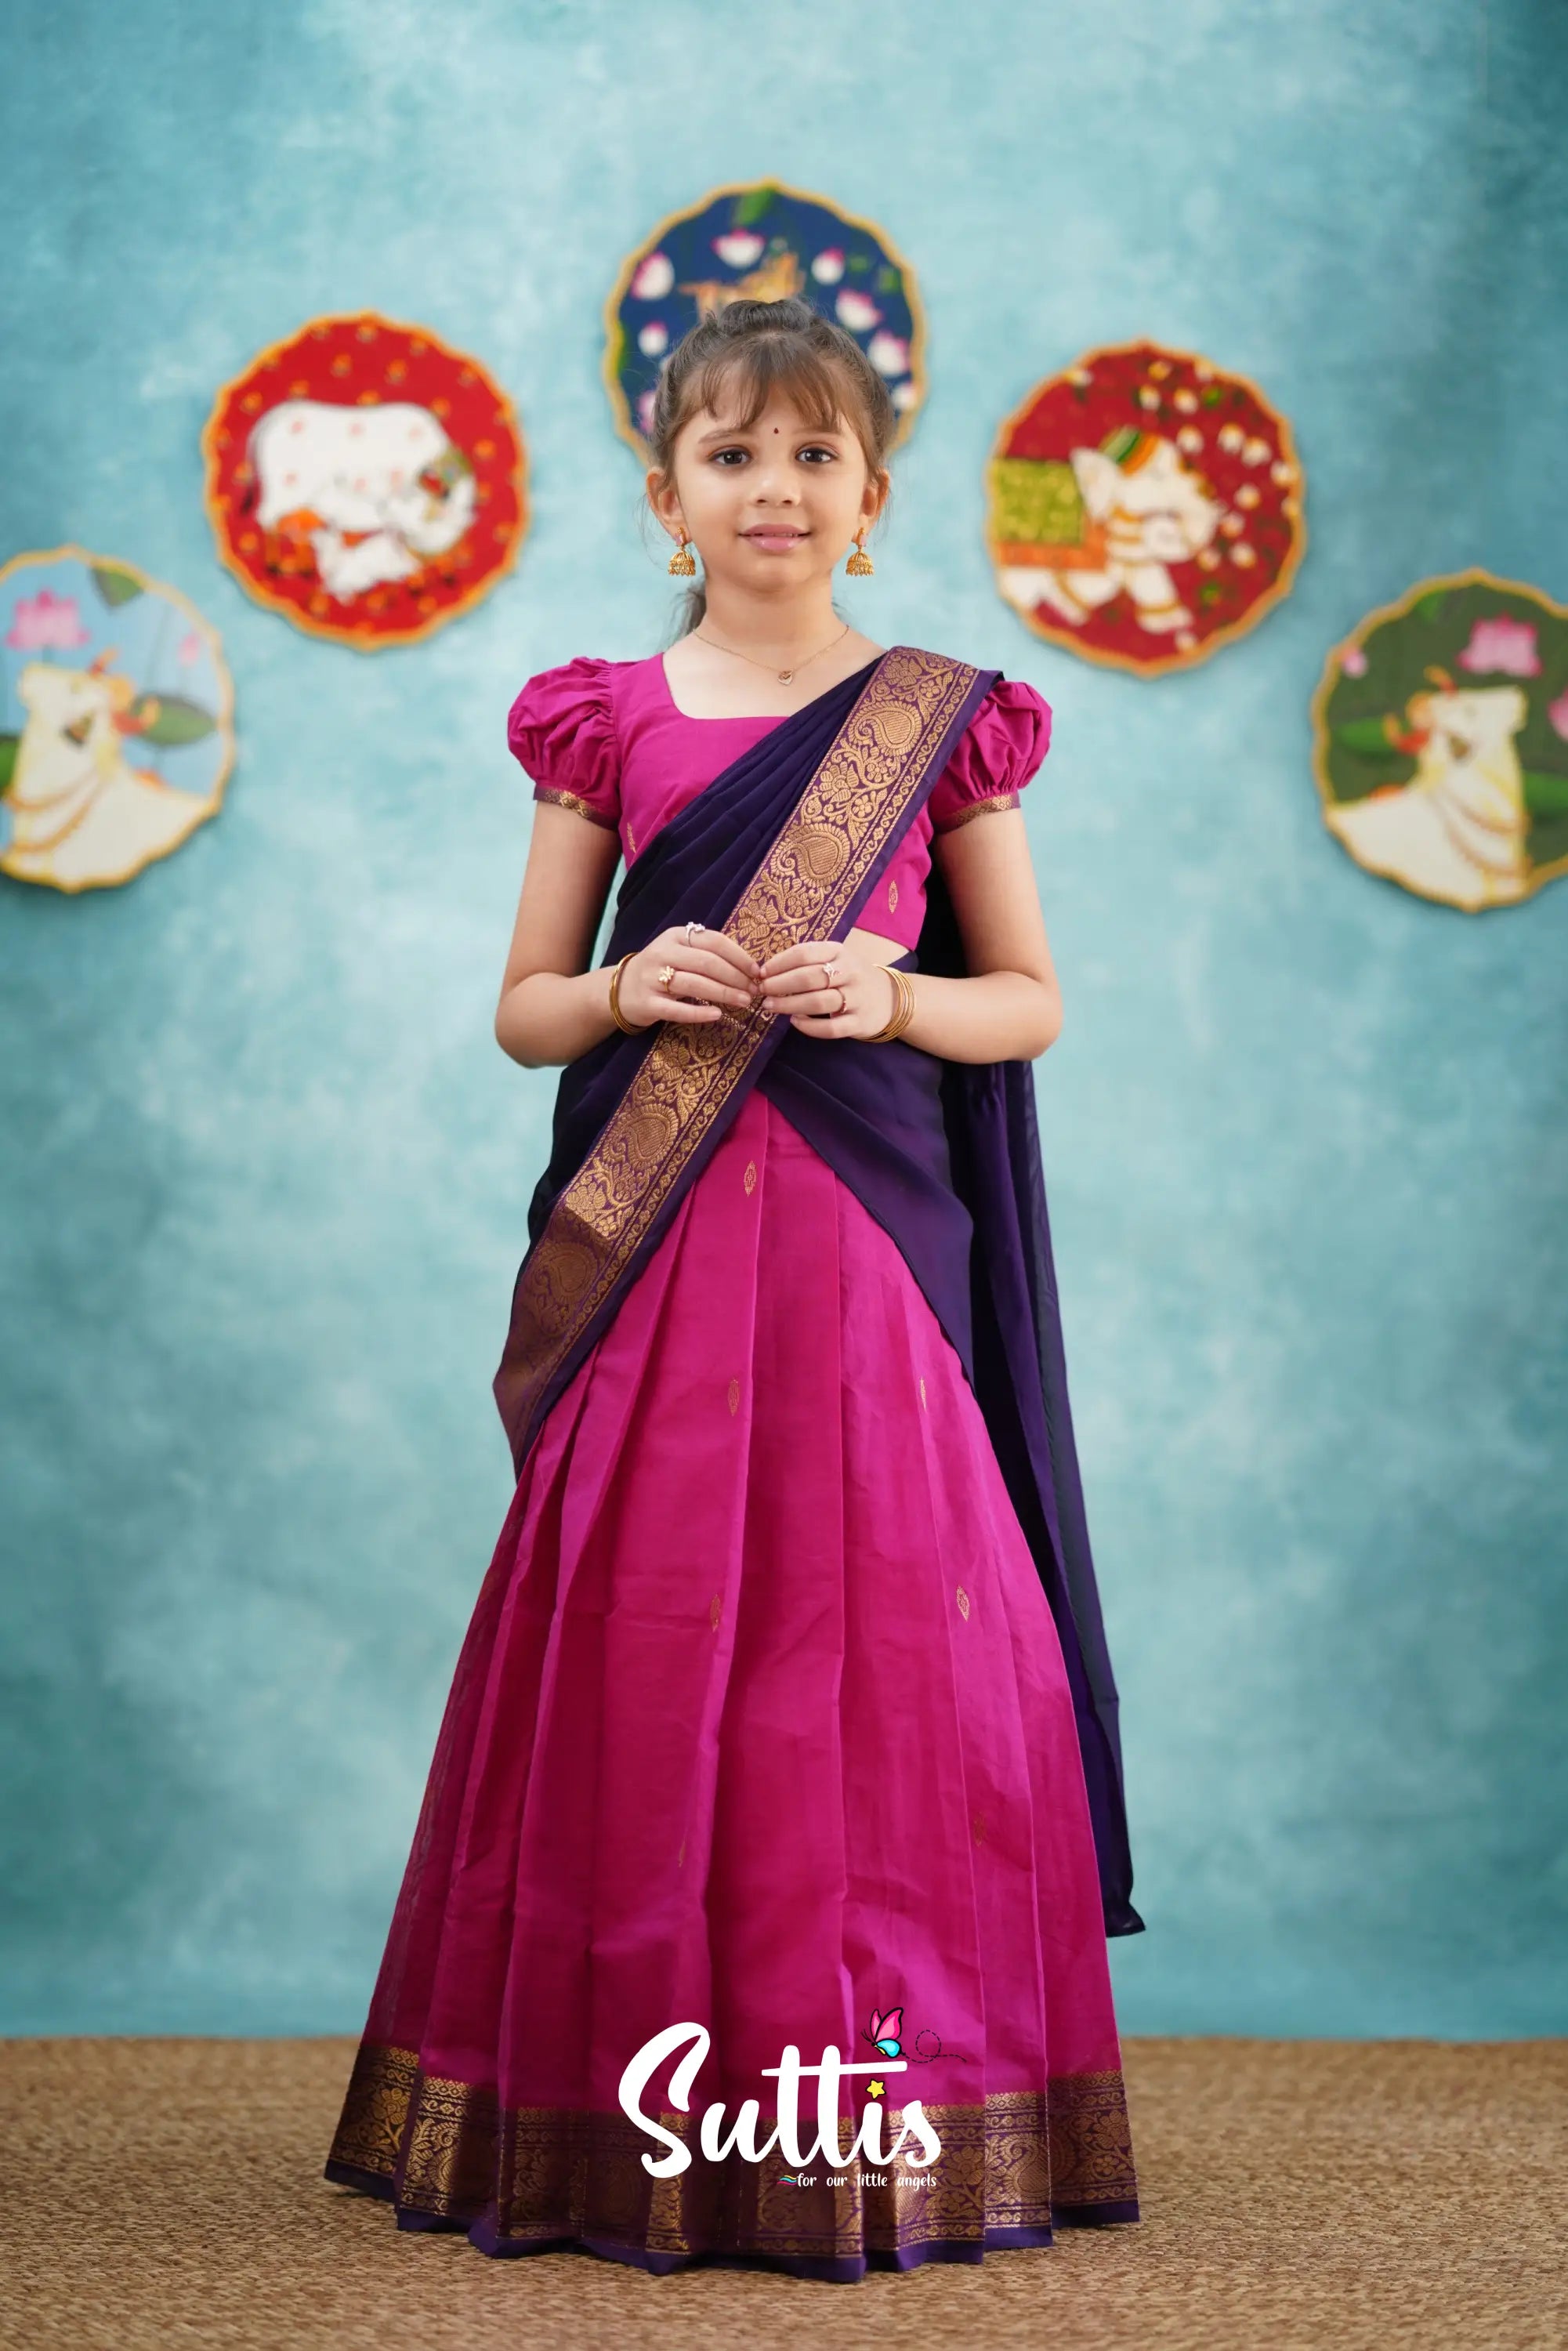 Saree Dress For Kids Hotsell - tundraecology.hi.is 1703857436